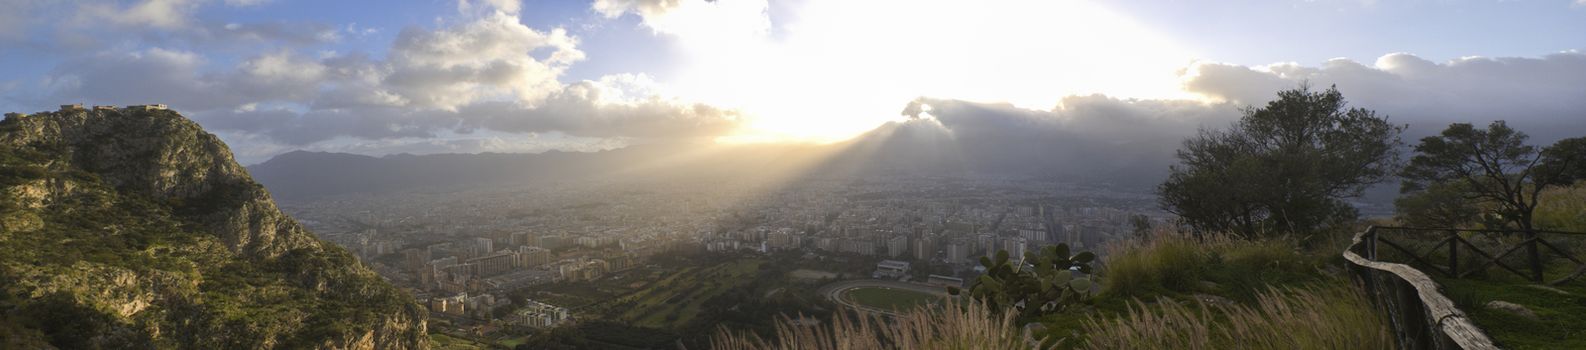 beautiful view of the city of Palermo at sunset